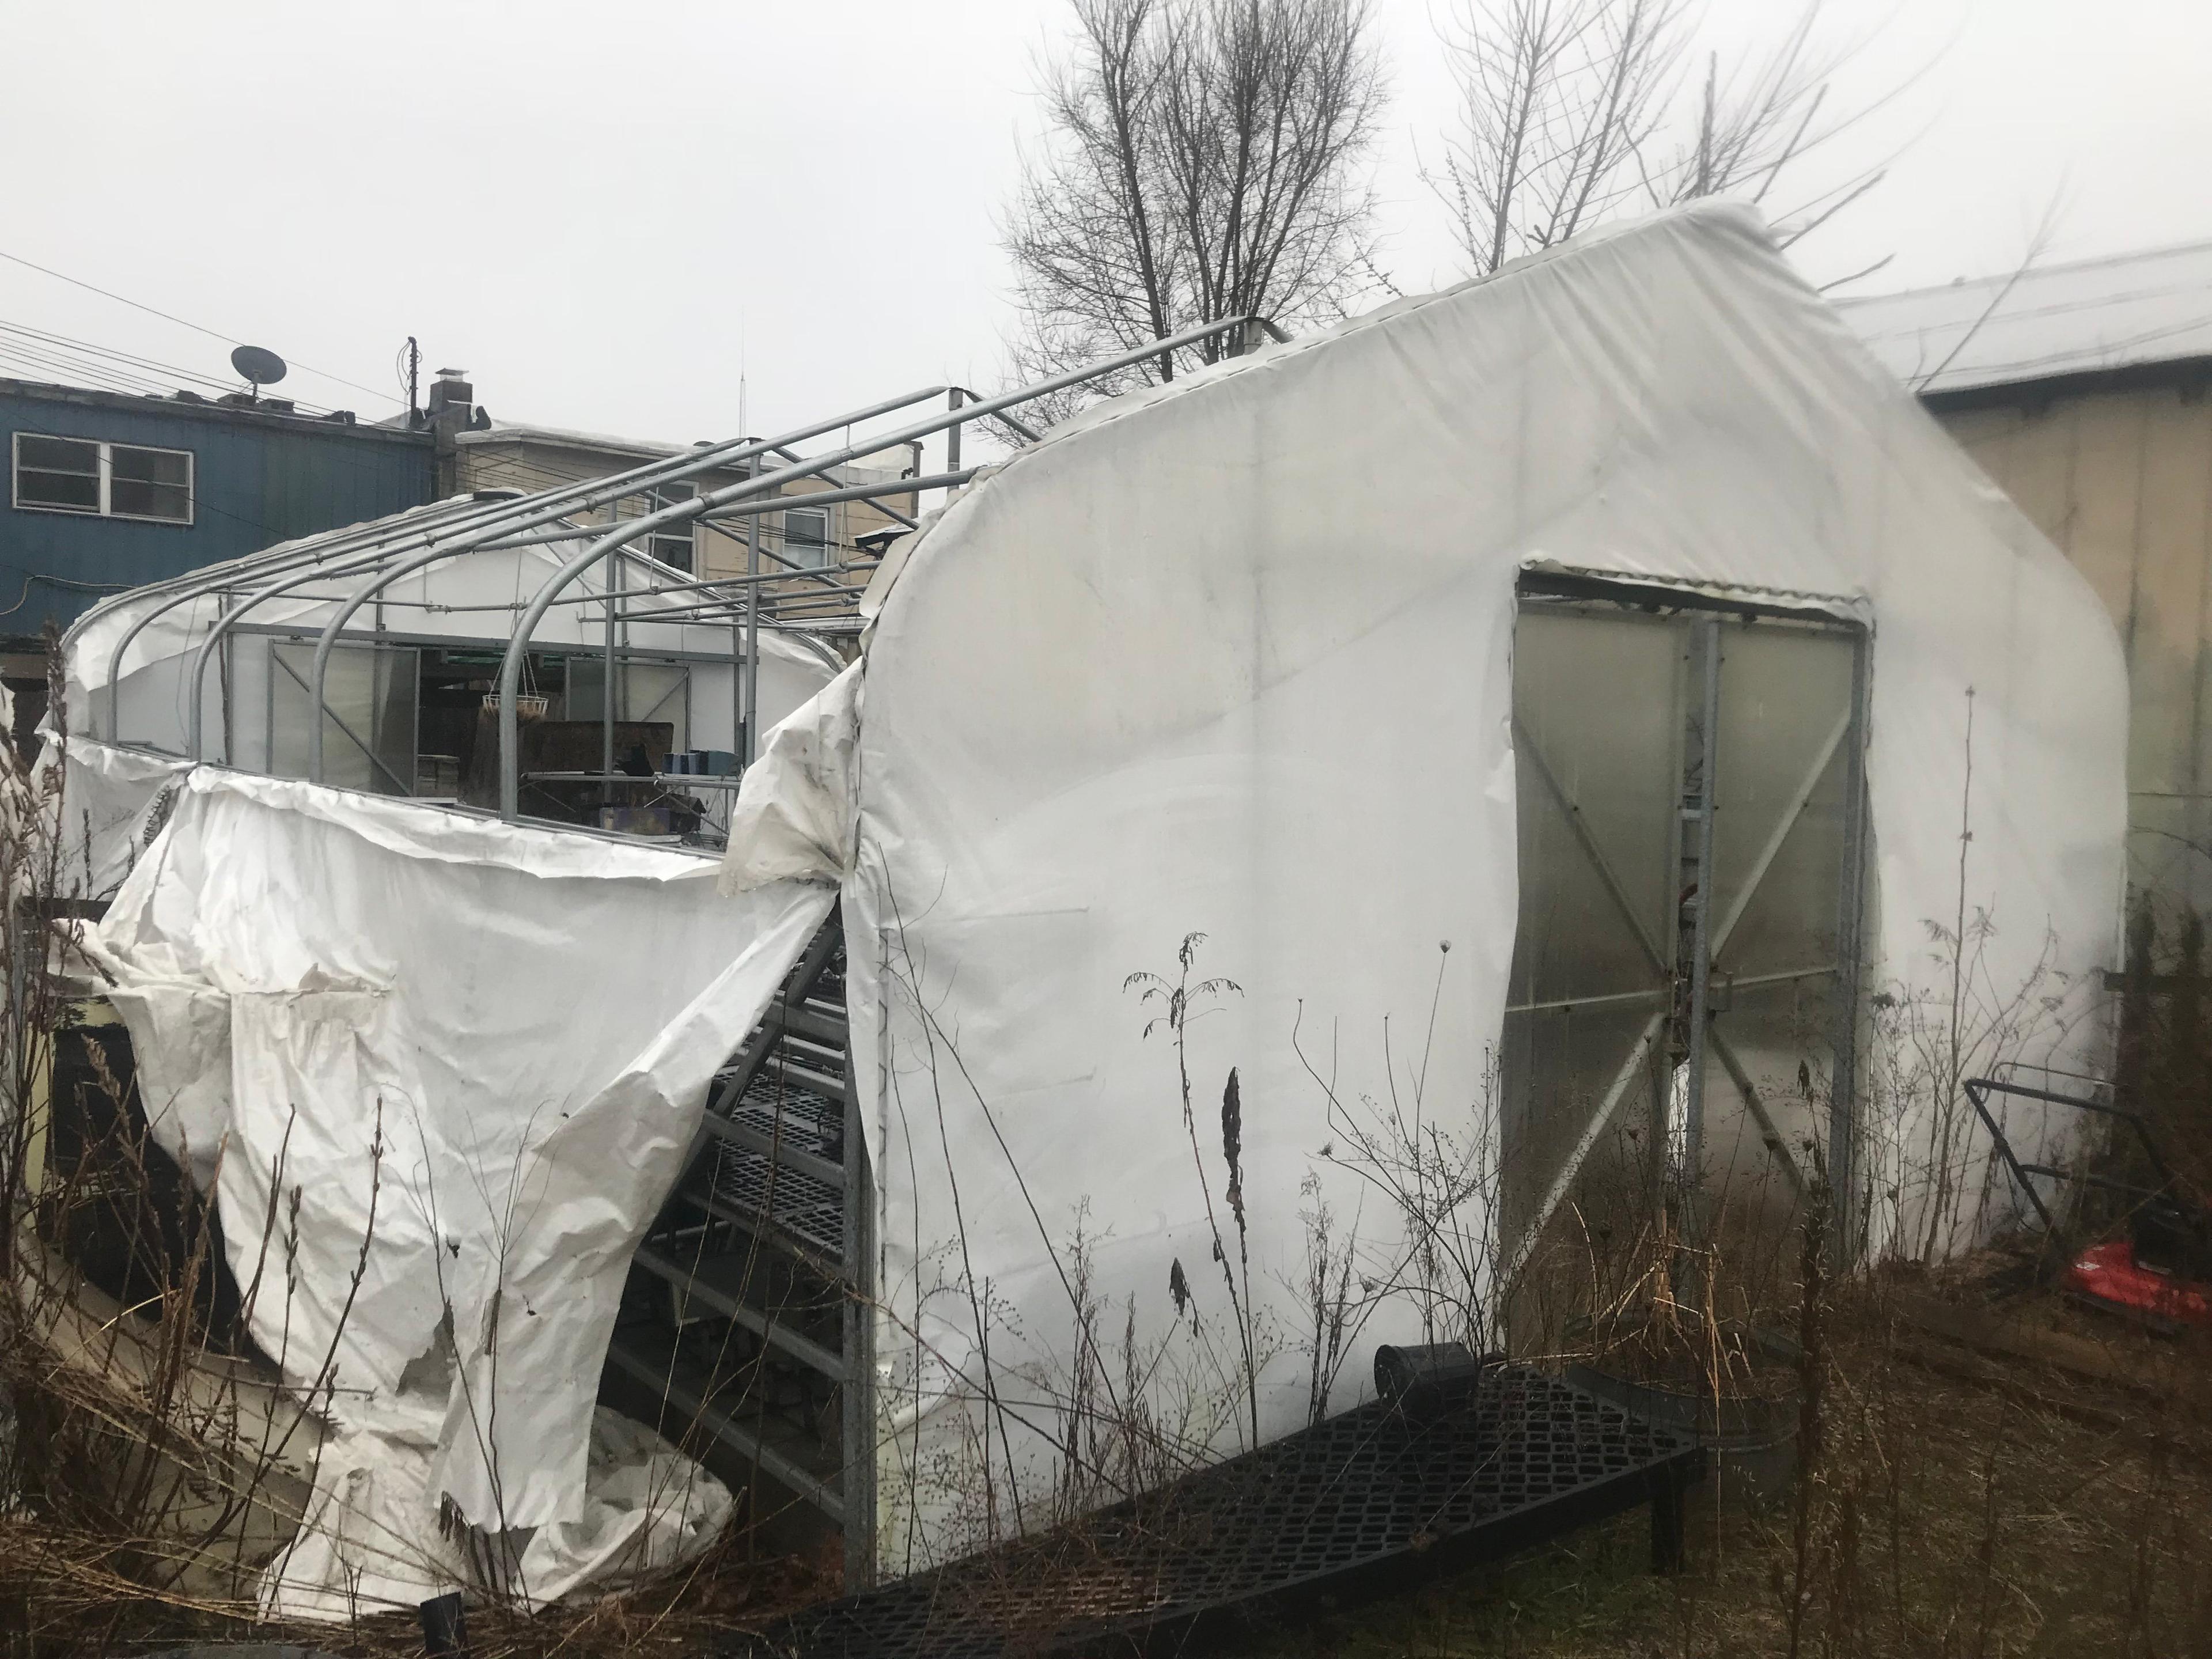 17 Ft. X 30 Ft. Bench-mart Sr Greenhouse, Used